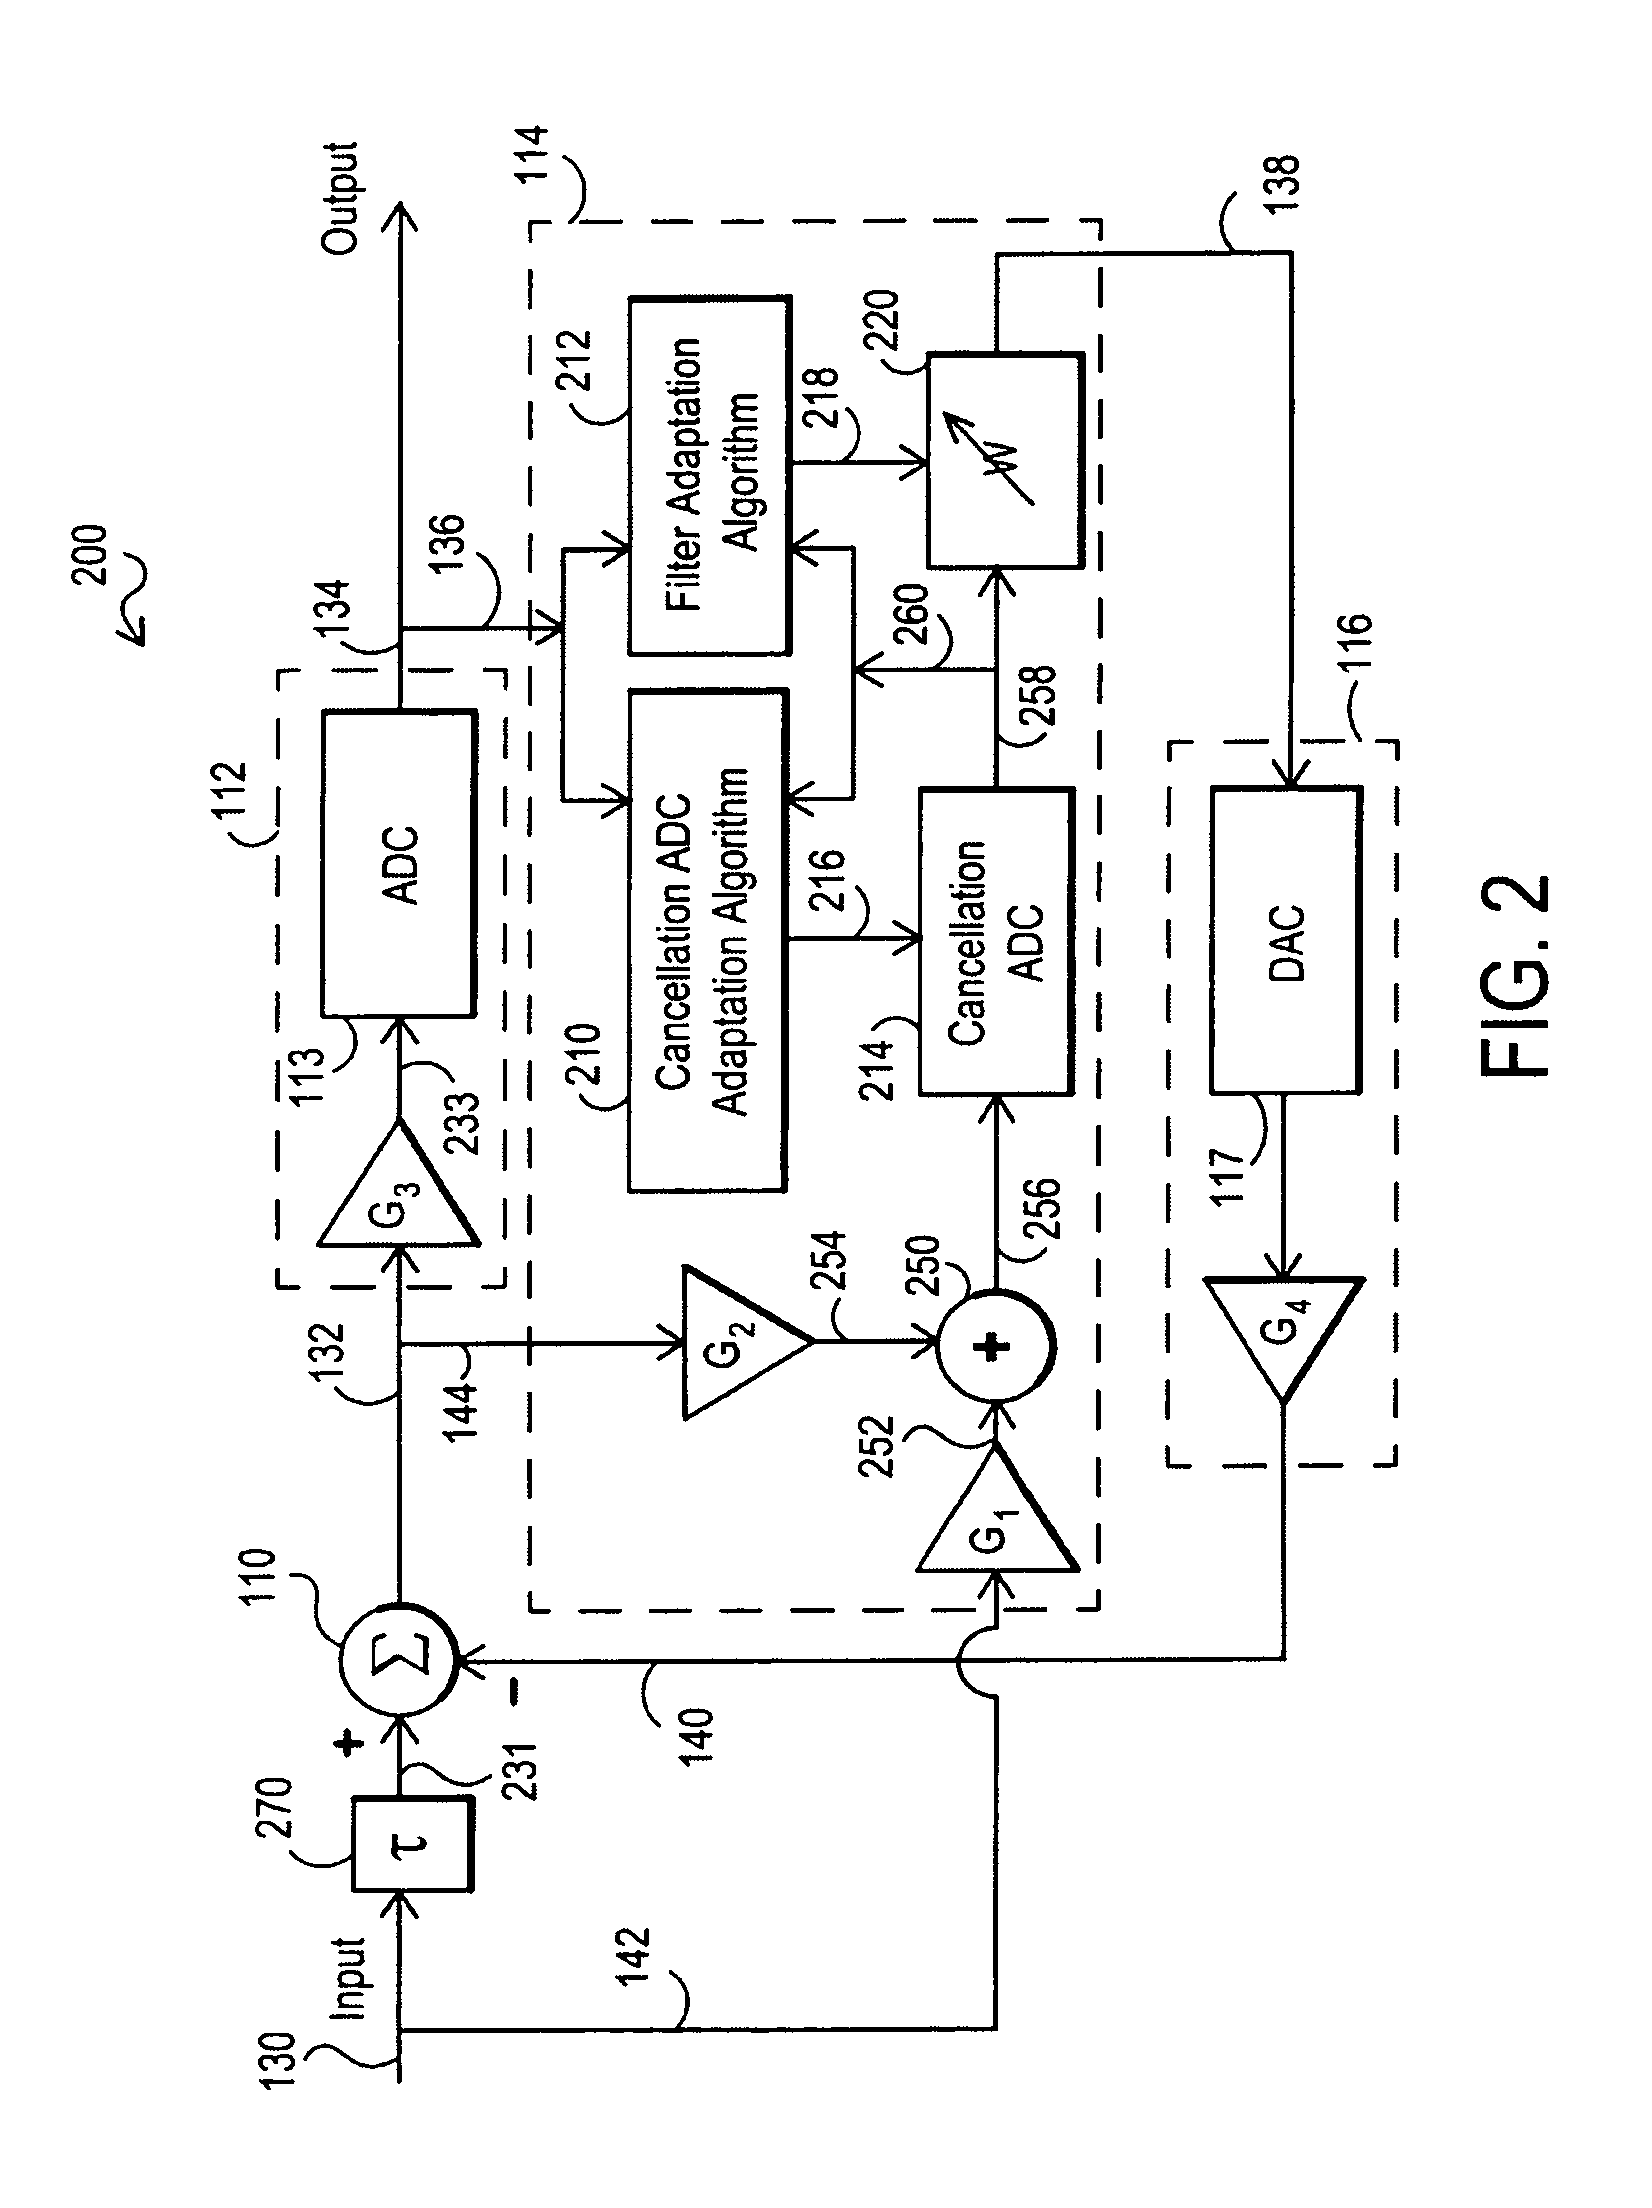 Systems and methods for multi-channel analog to digital conversion